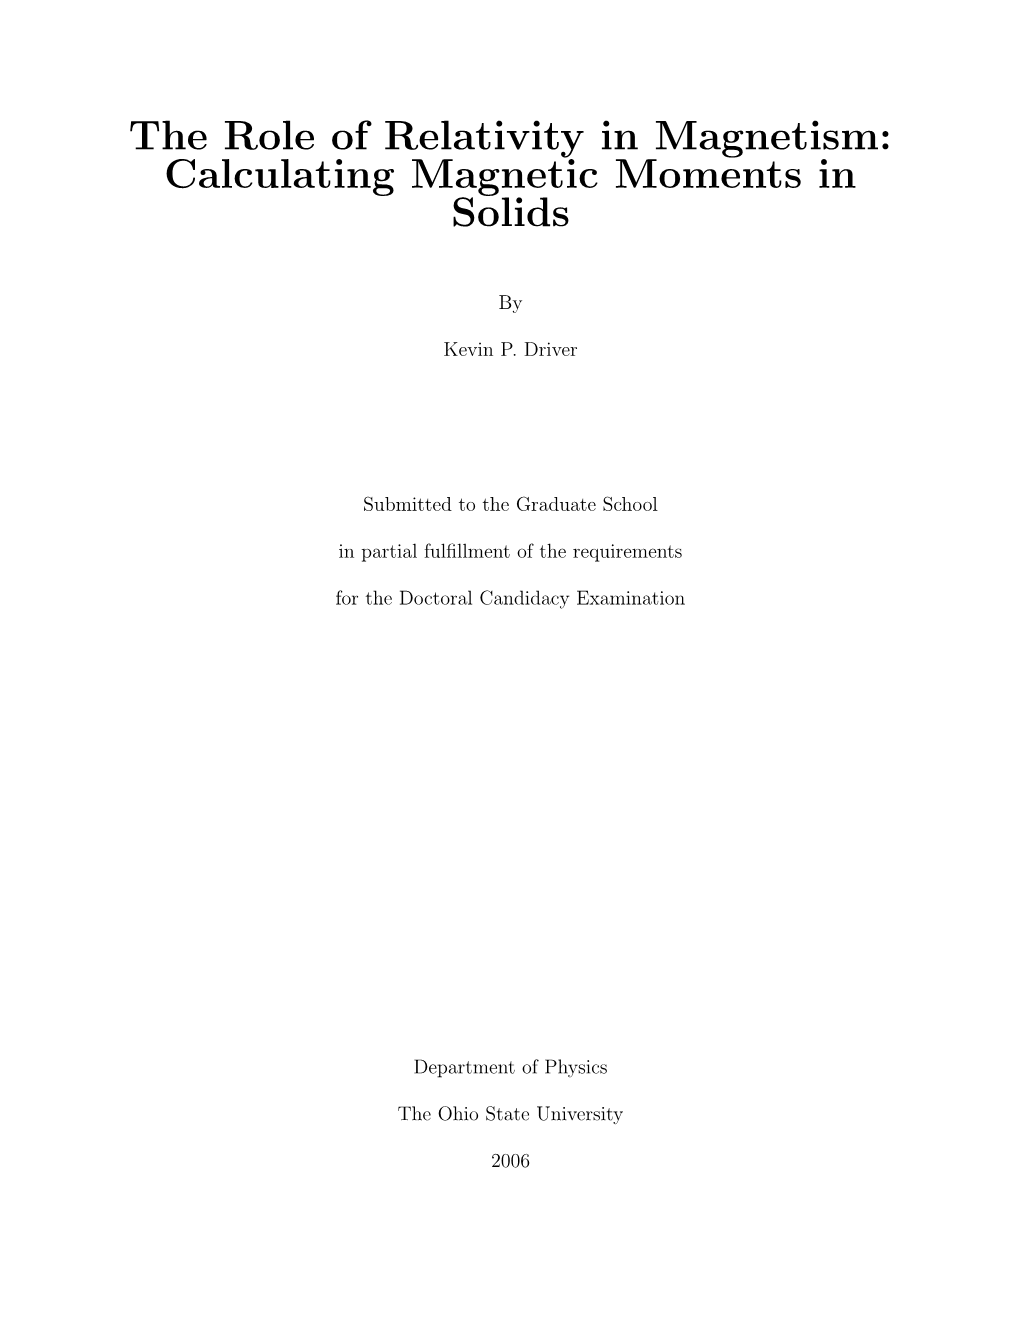 The Role of Relativity in Magnetism: Calculating Magnetic Moments in Solids